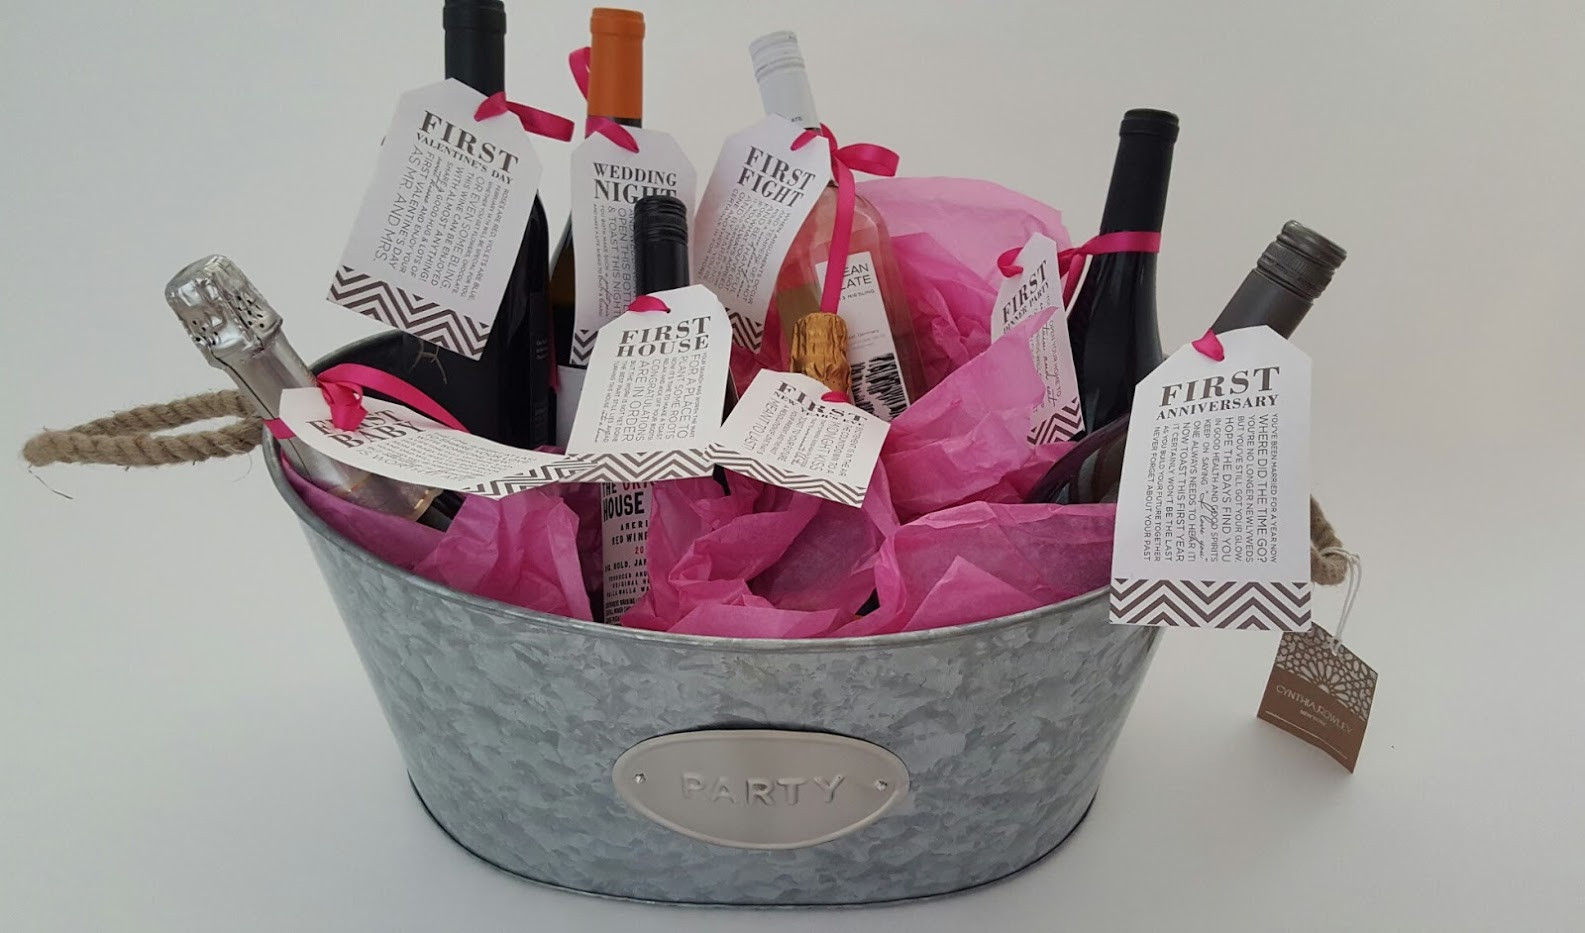 Gift Basket Ideas For Bridal Showers
 Bridal Shower Gift DIY to Try A Basket of “Firsts” for